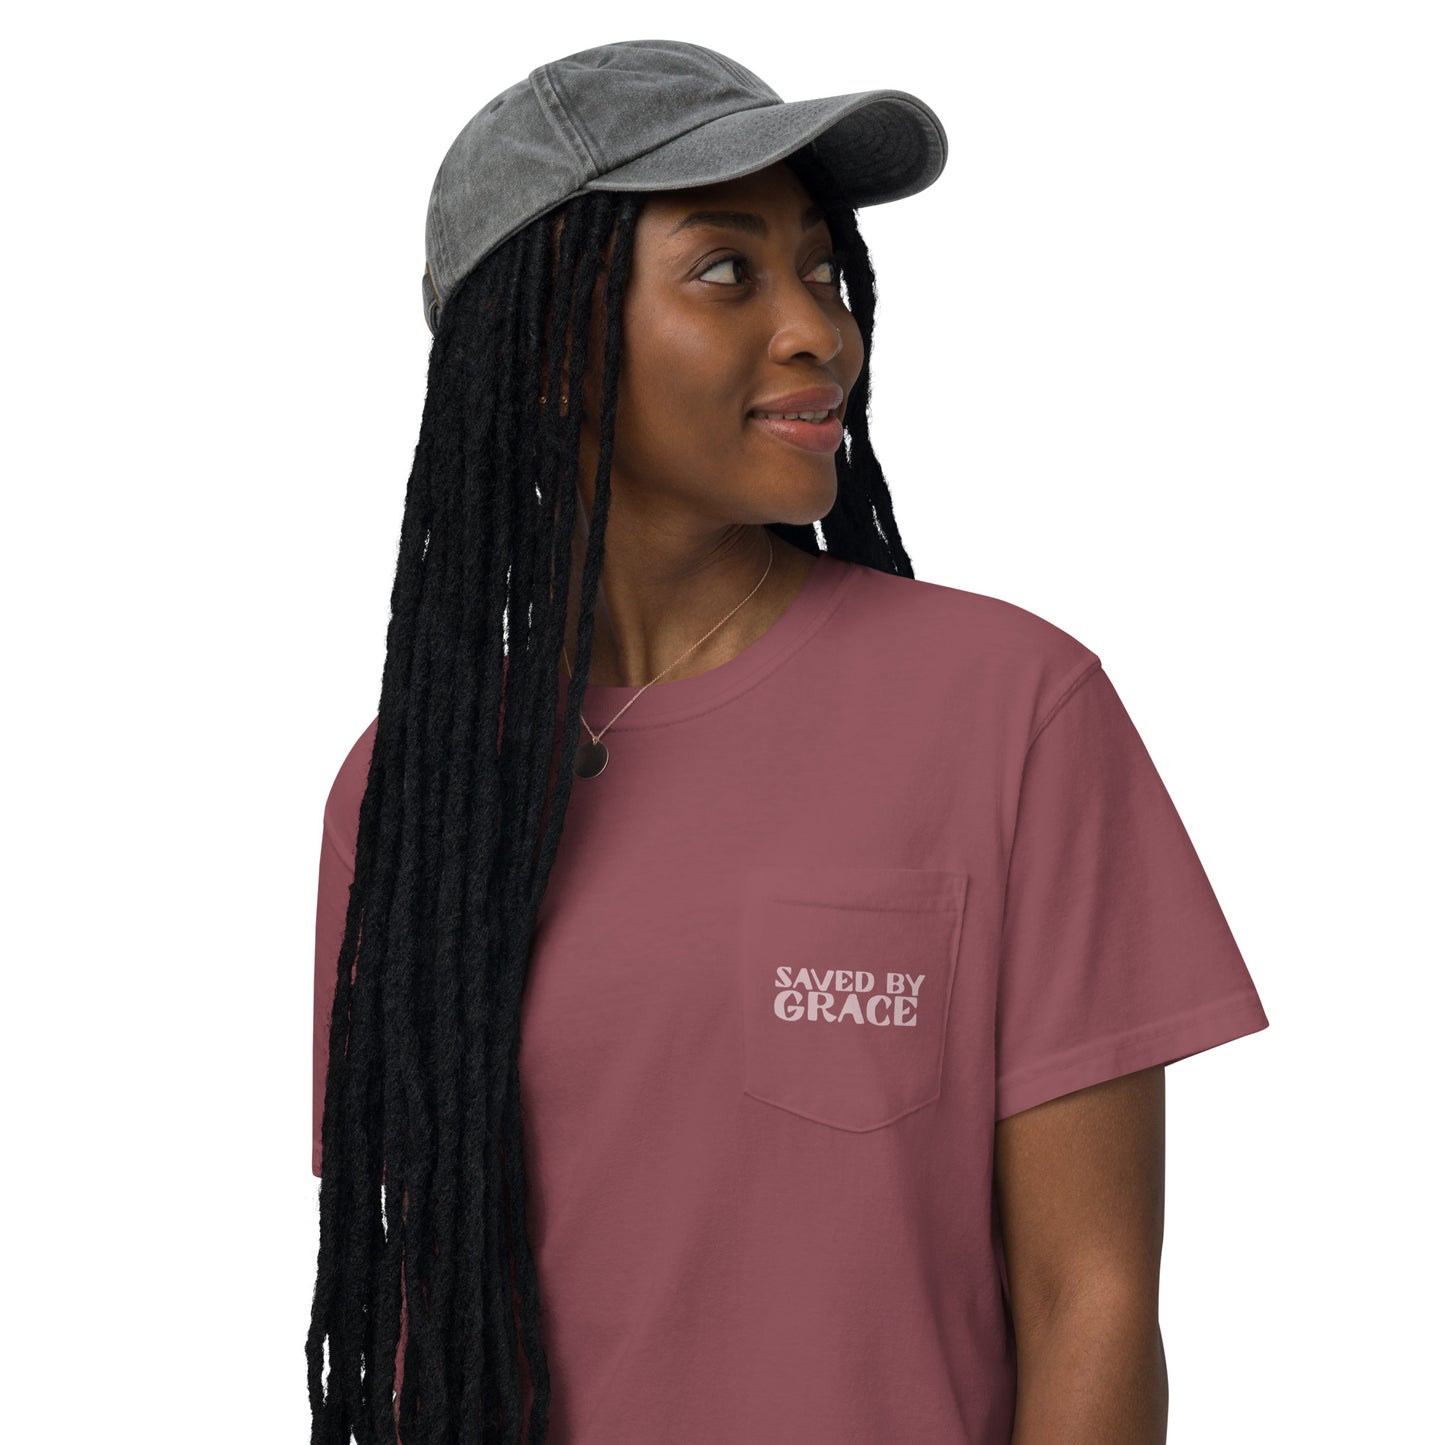 "Saved By Grace" Unisex garment-dyed pocket t-shirt